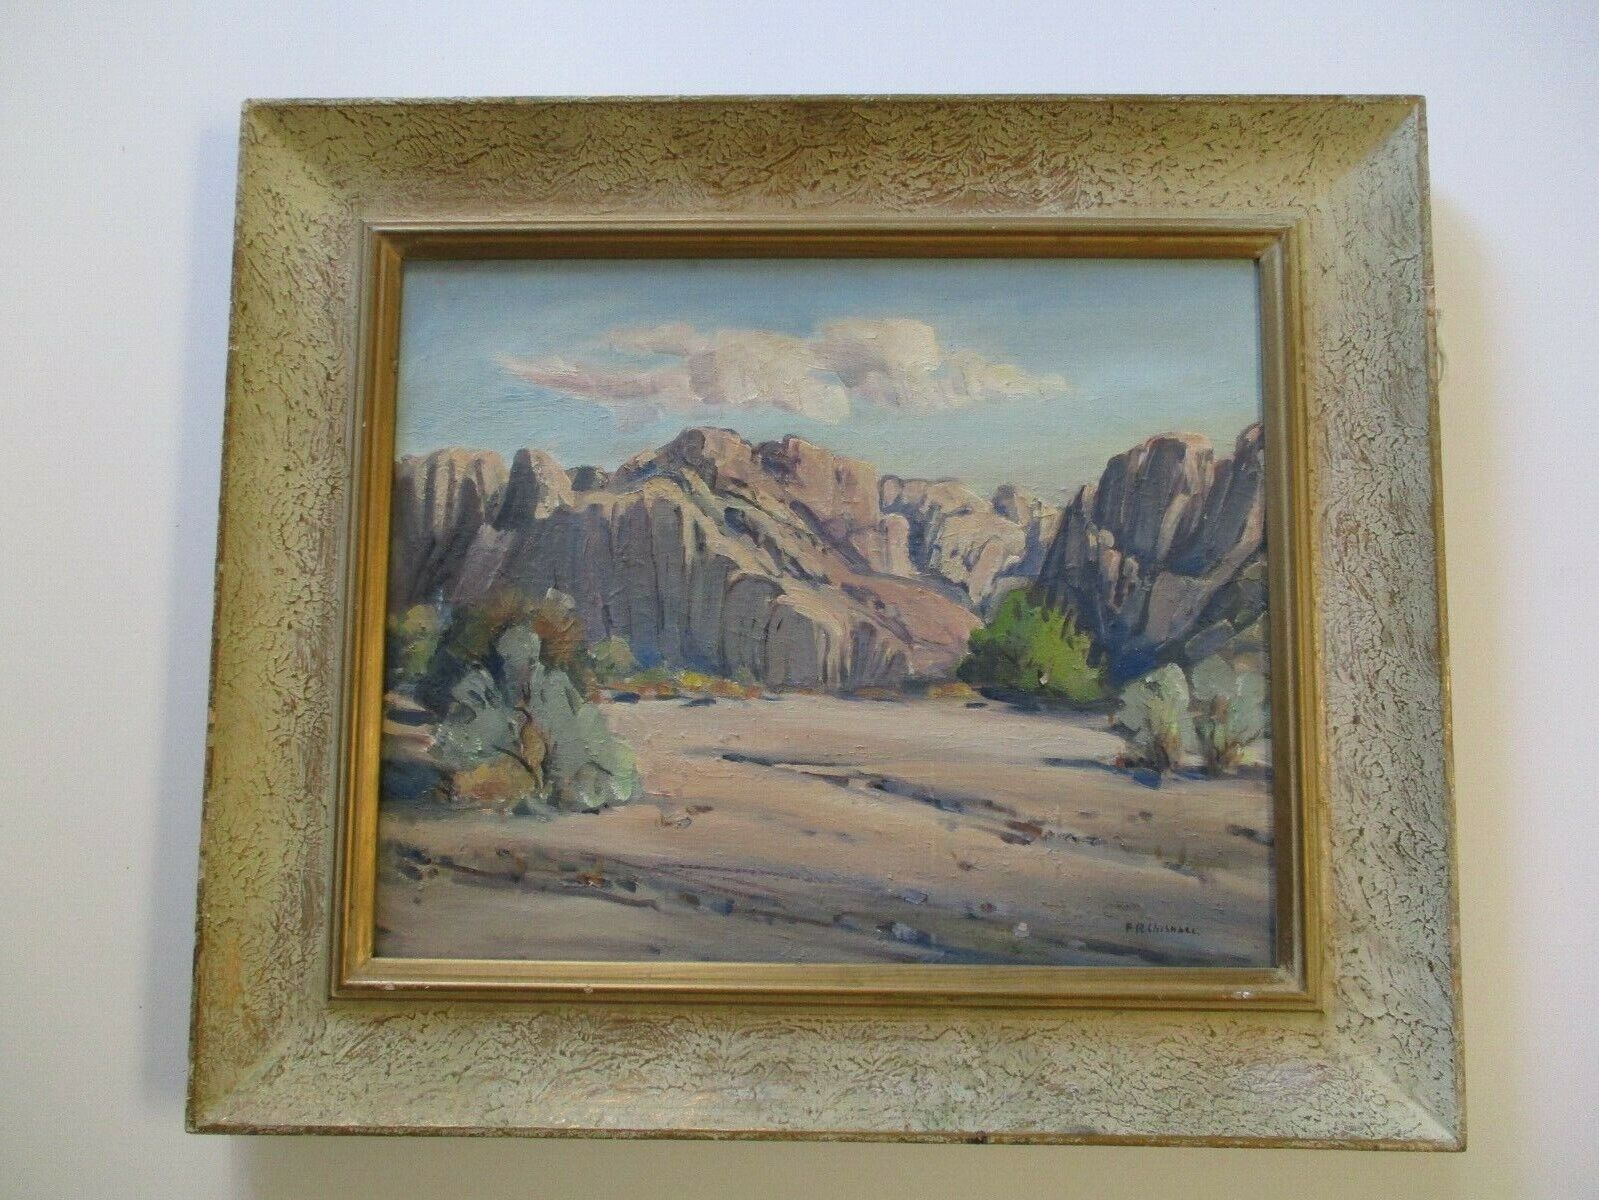 ANTIQUE FREDERICK CHISNALL PAINTING DESERT CALIFORNIA LANDSCAPE LISTED FINEST